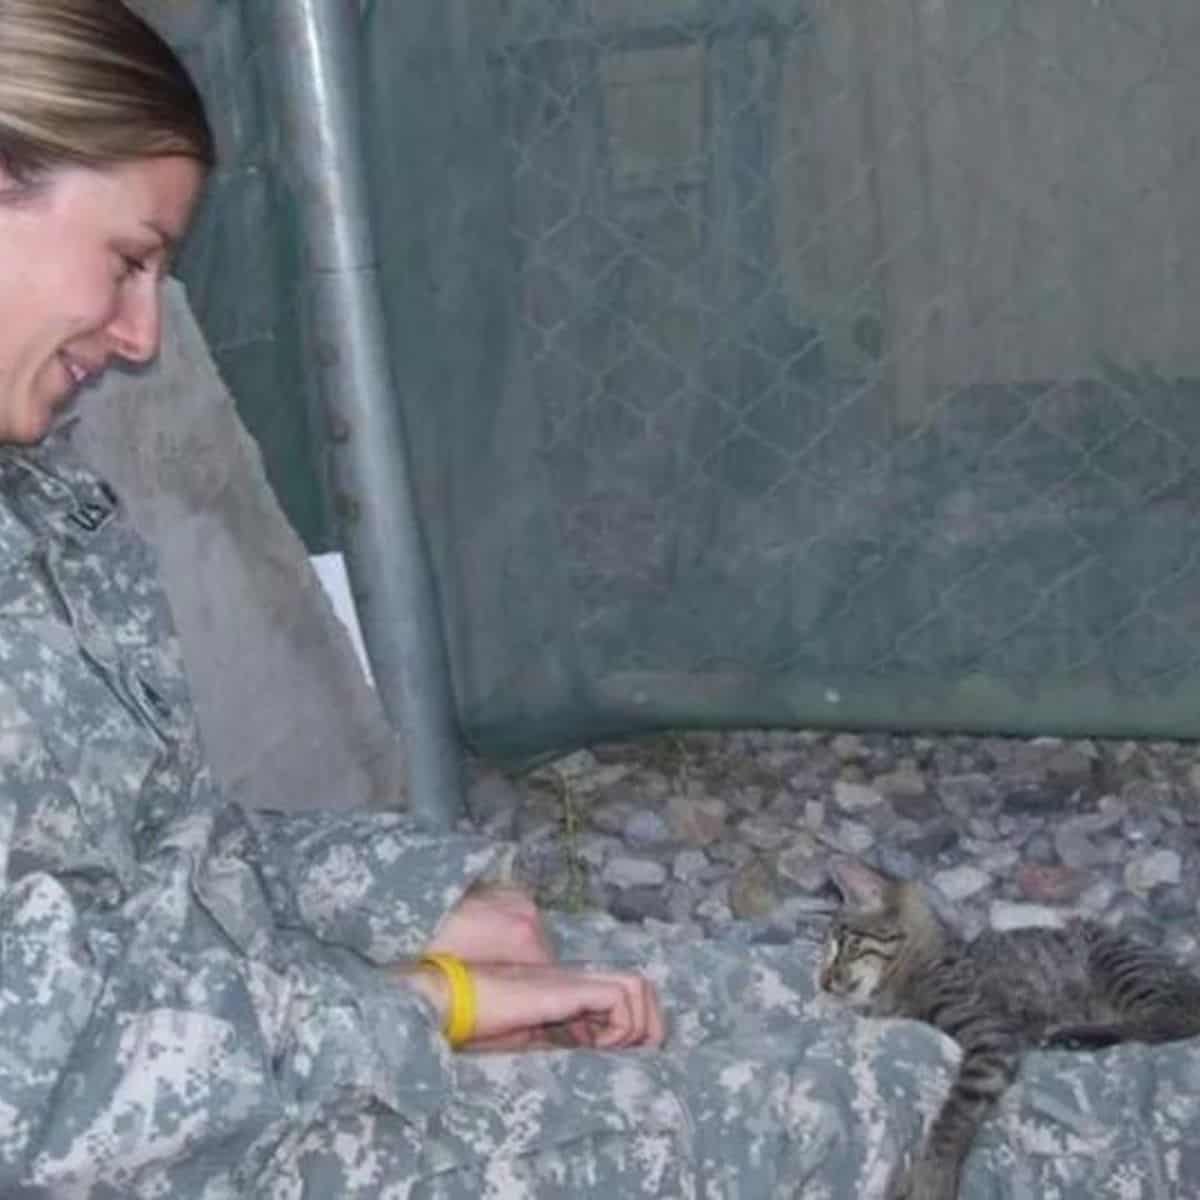 Solider woman starring at the cat